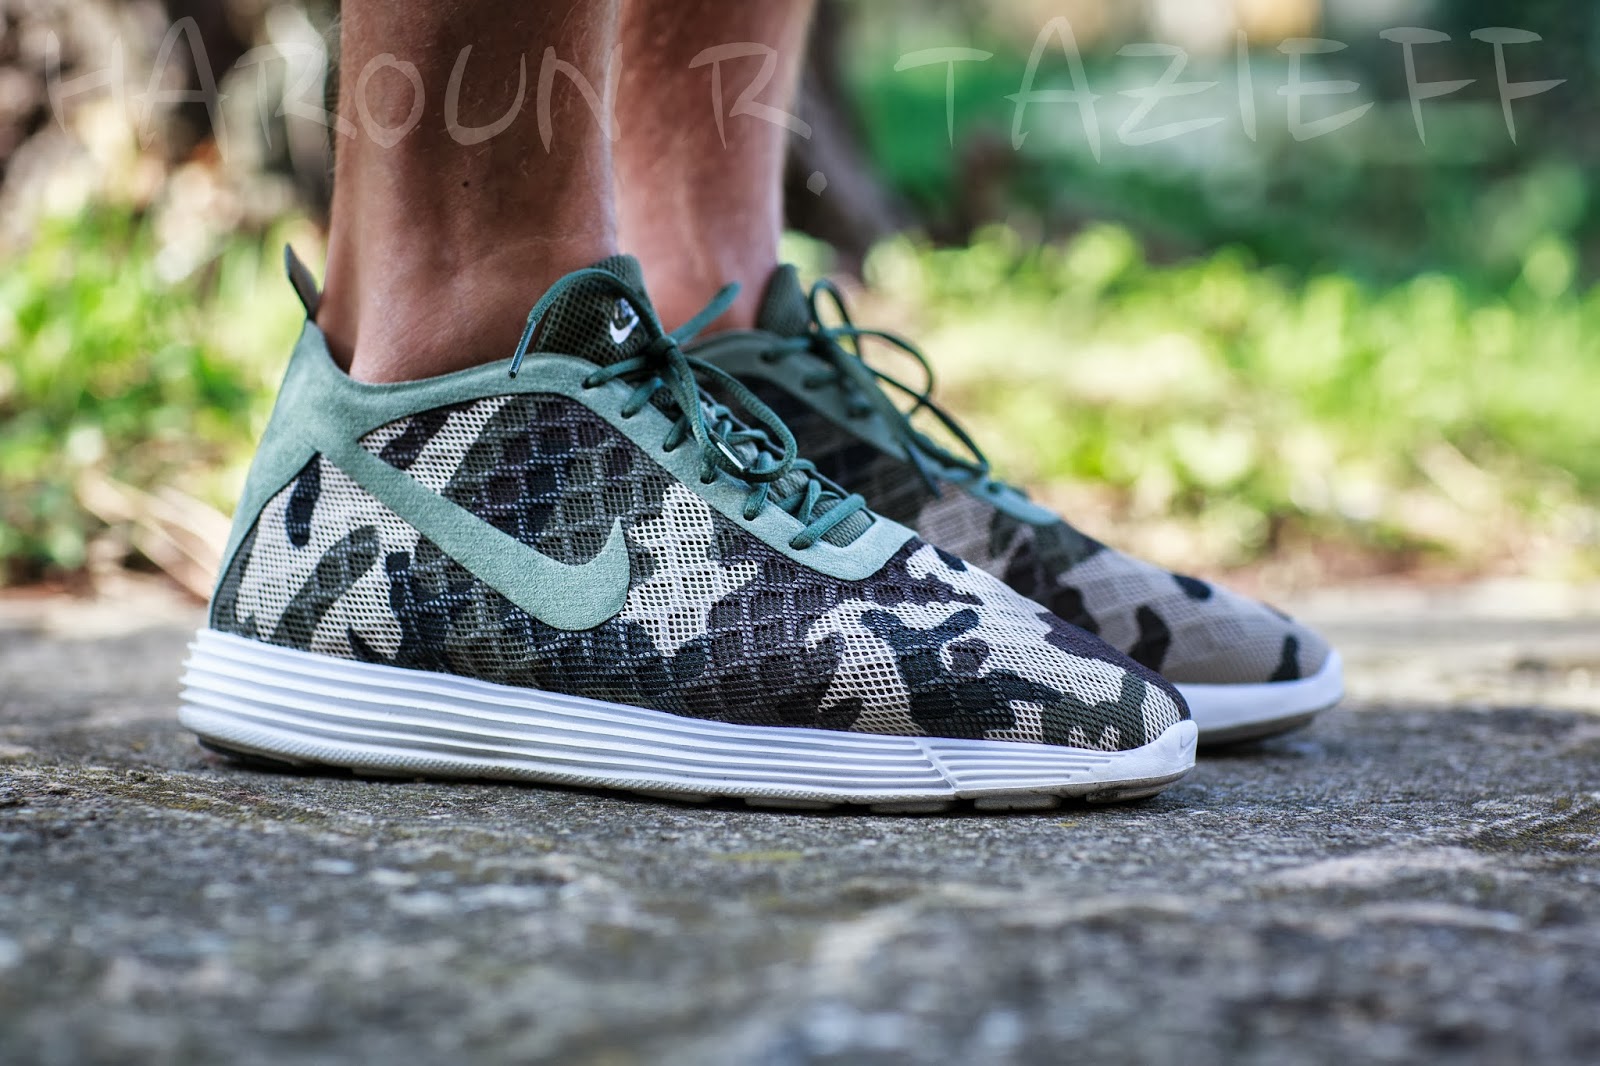 Step Into My Running Shoes: Nike Lunar Rejuven8 FCRB